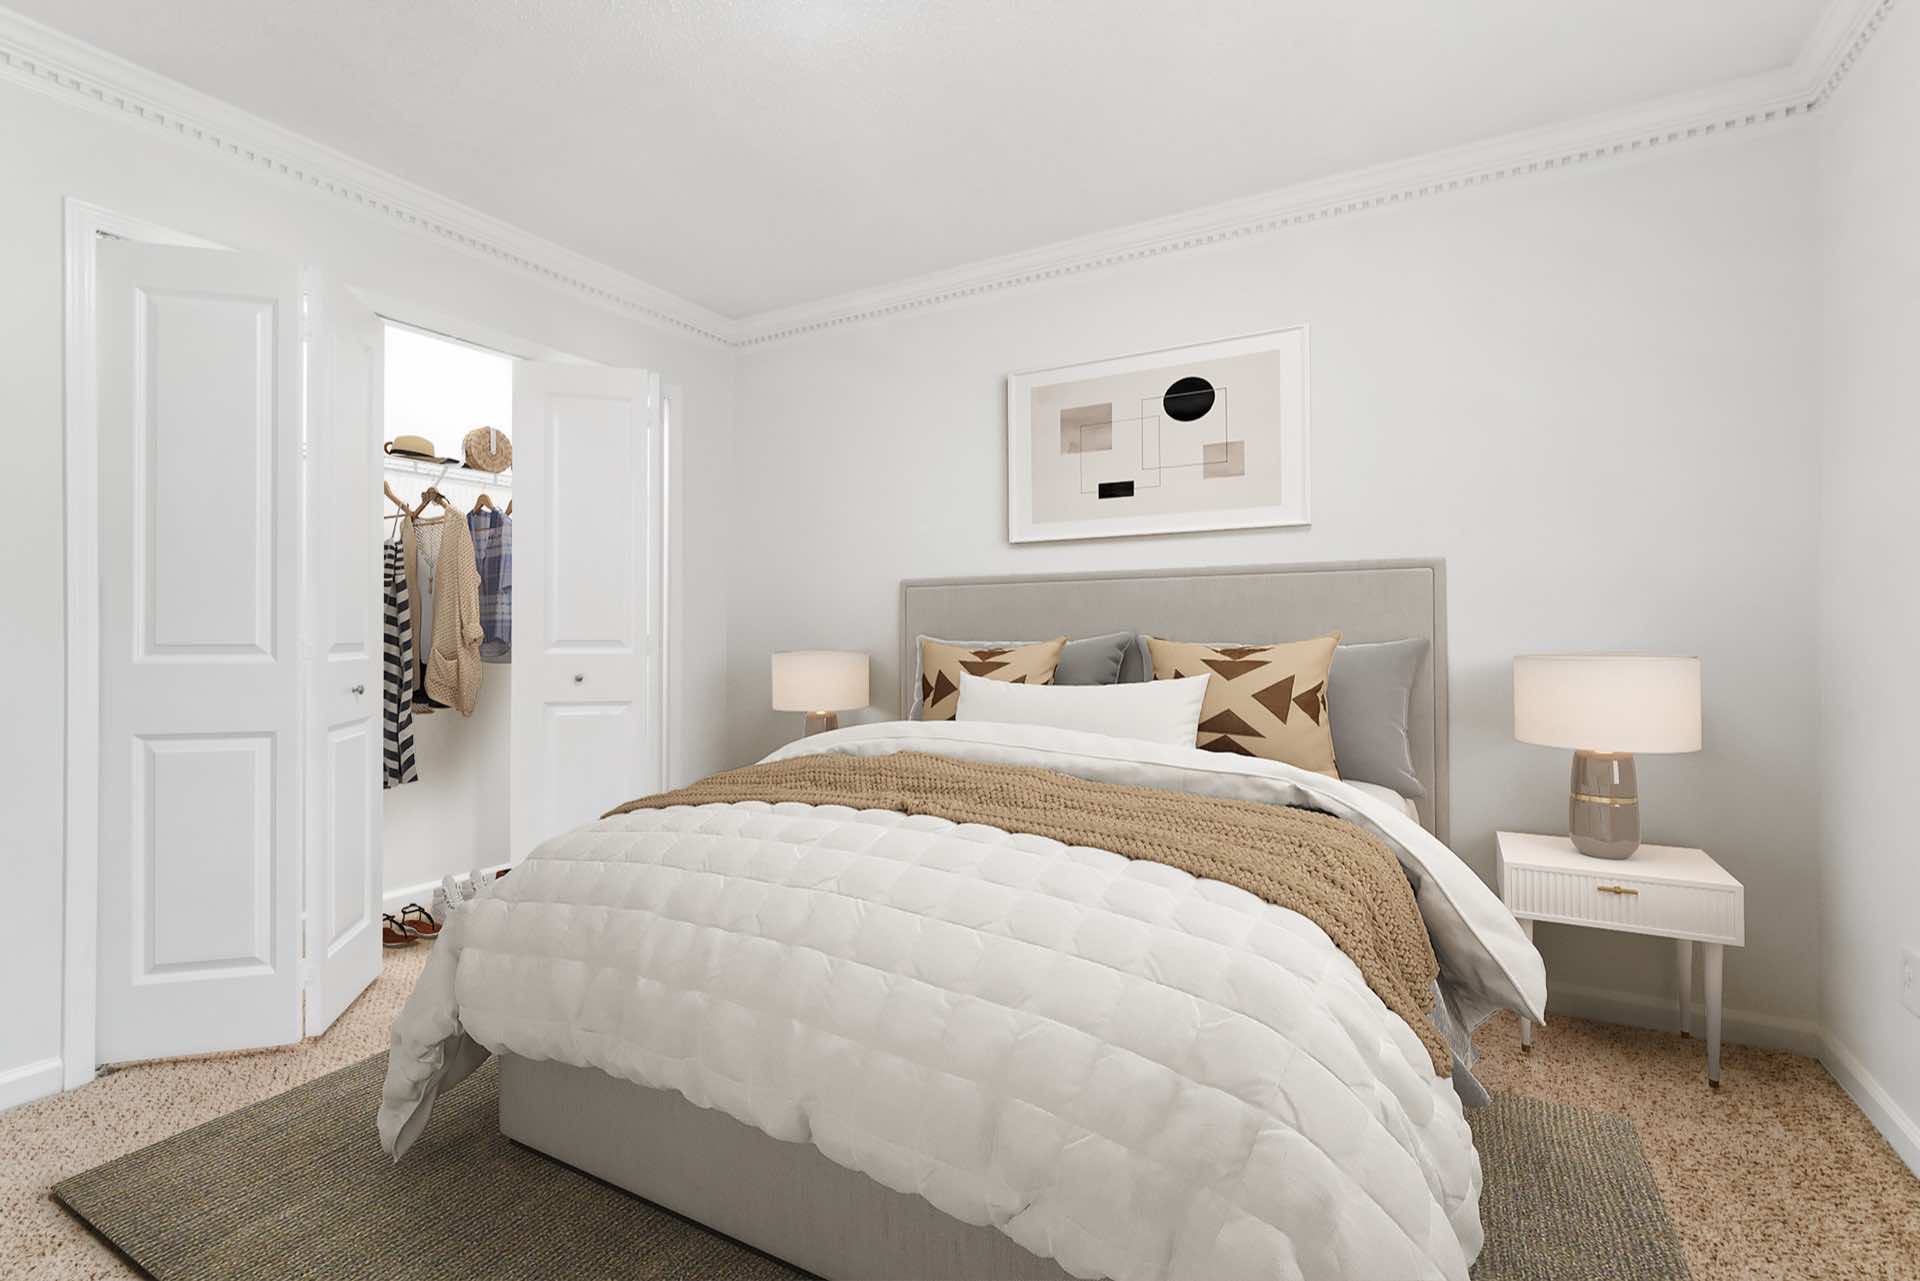 bedroom with plush carpeting, wall art, and reach-in closet